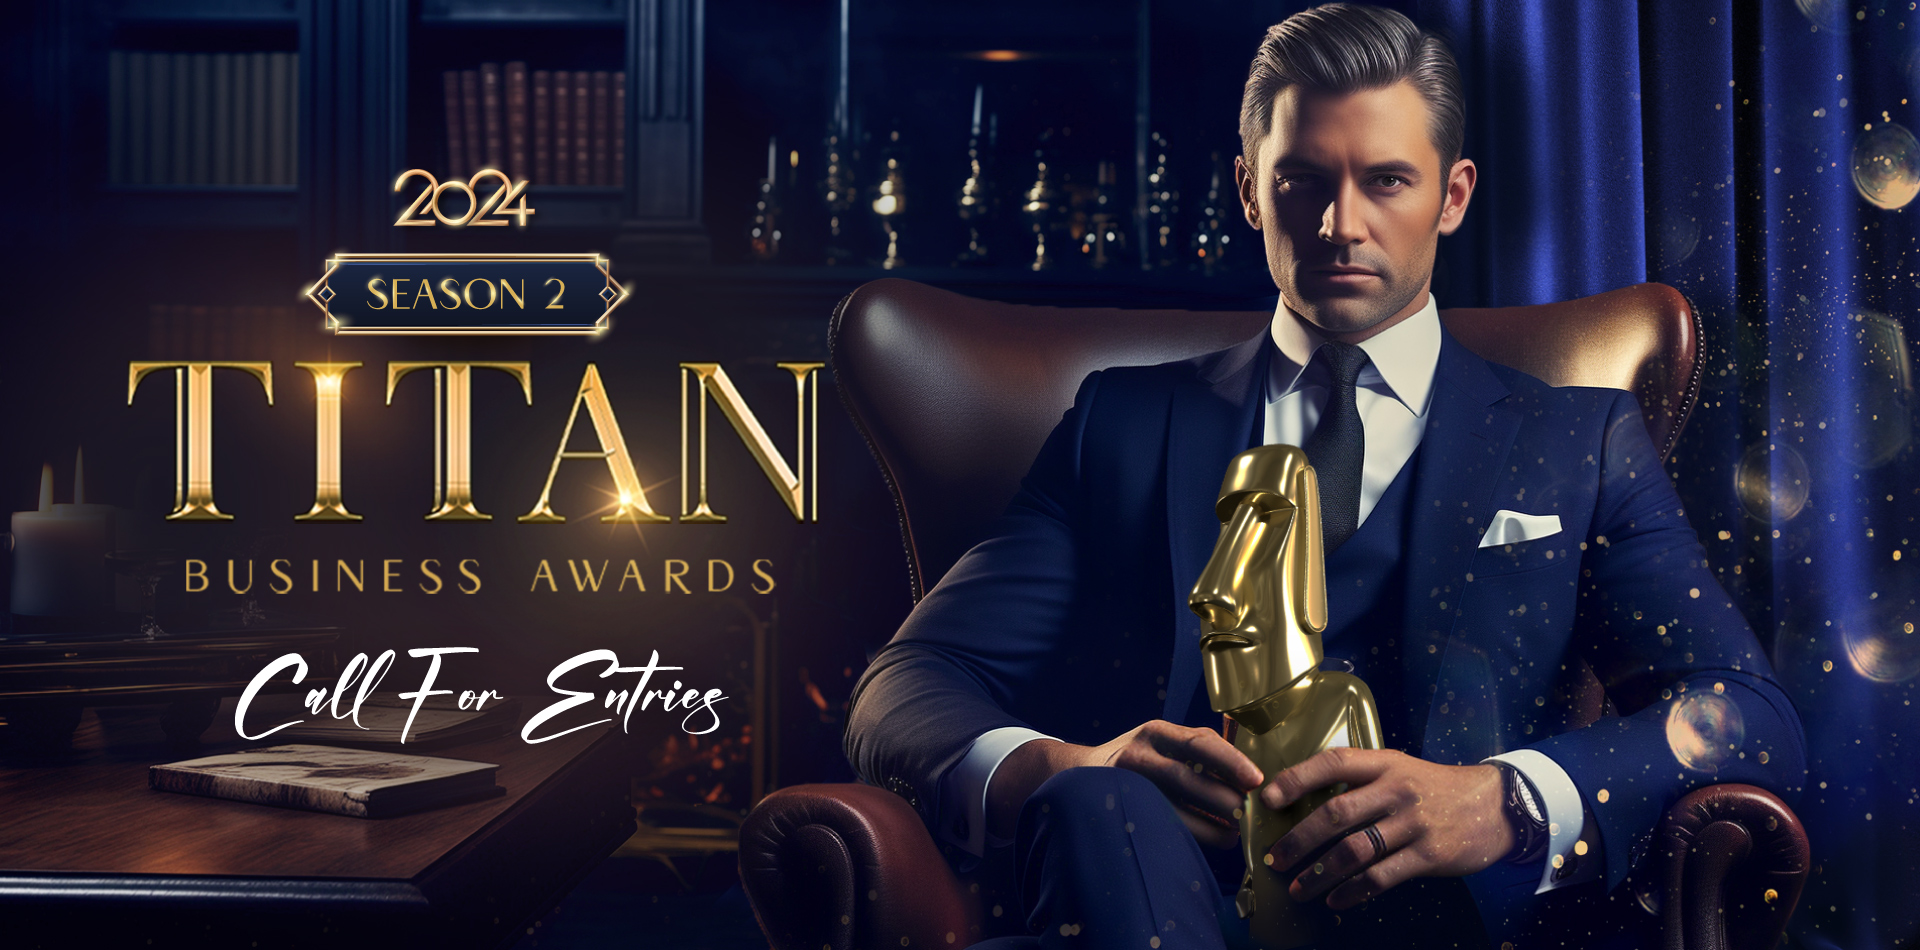 TITAN Business Awards 2024 S2 Call For Entries